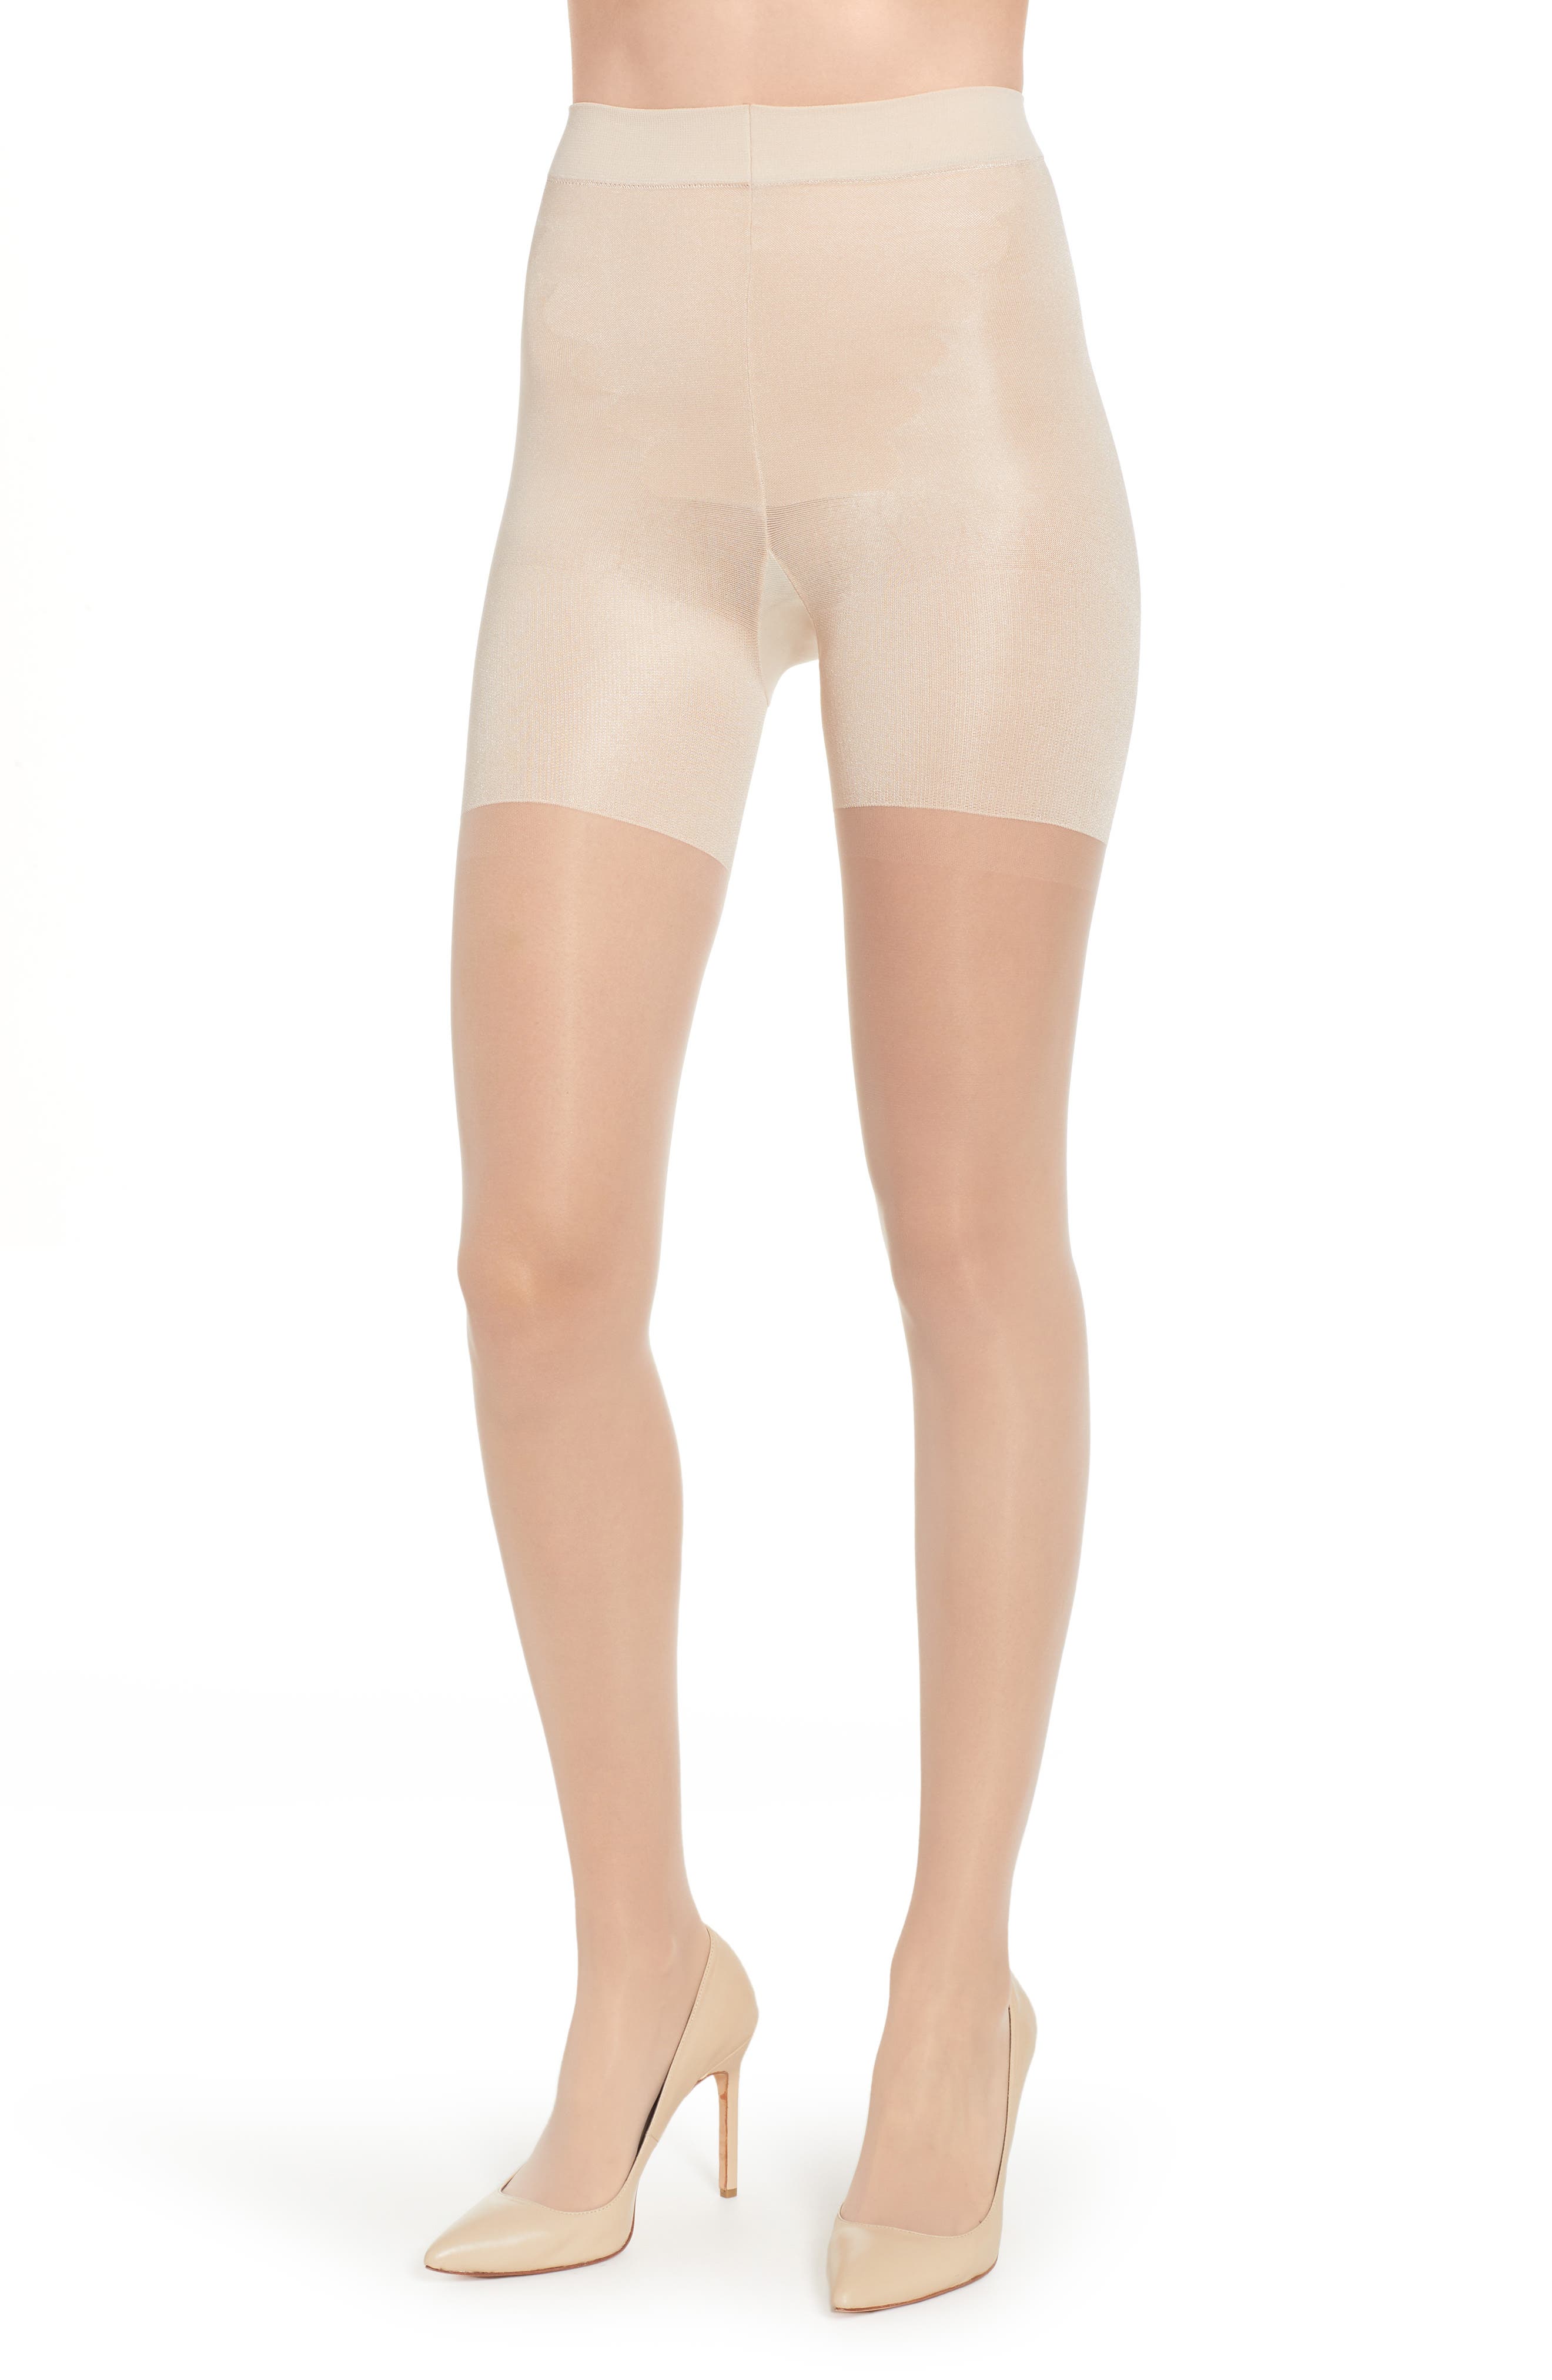 Spanx Graduated Compression Shaping Sheers In S2